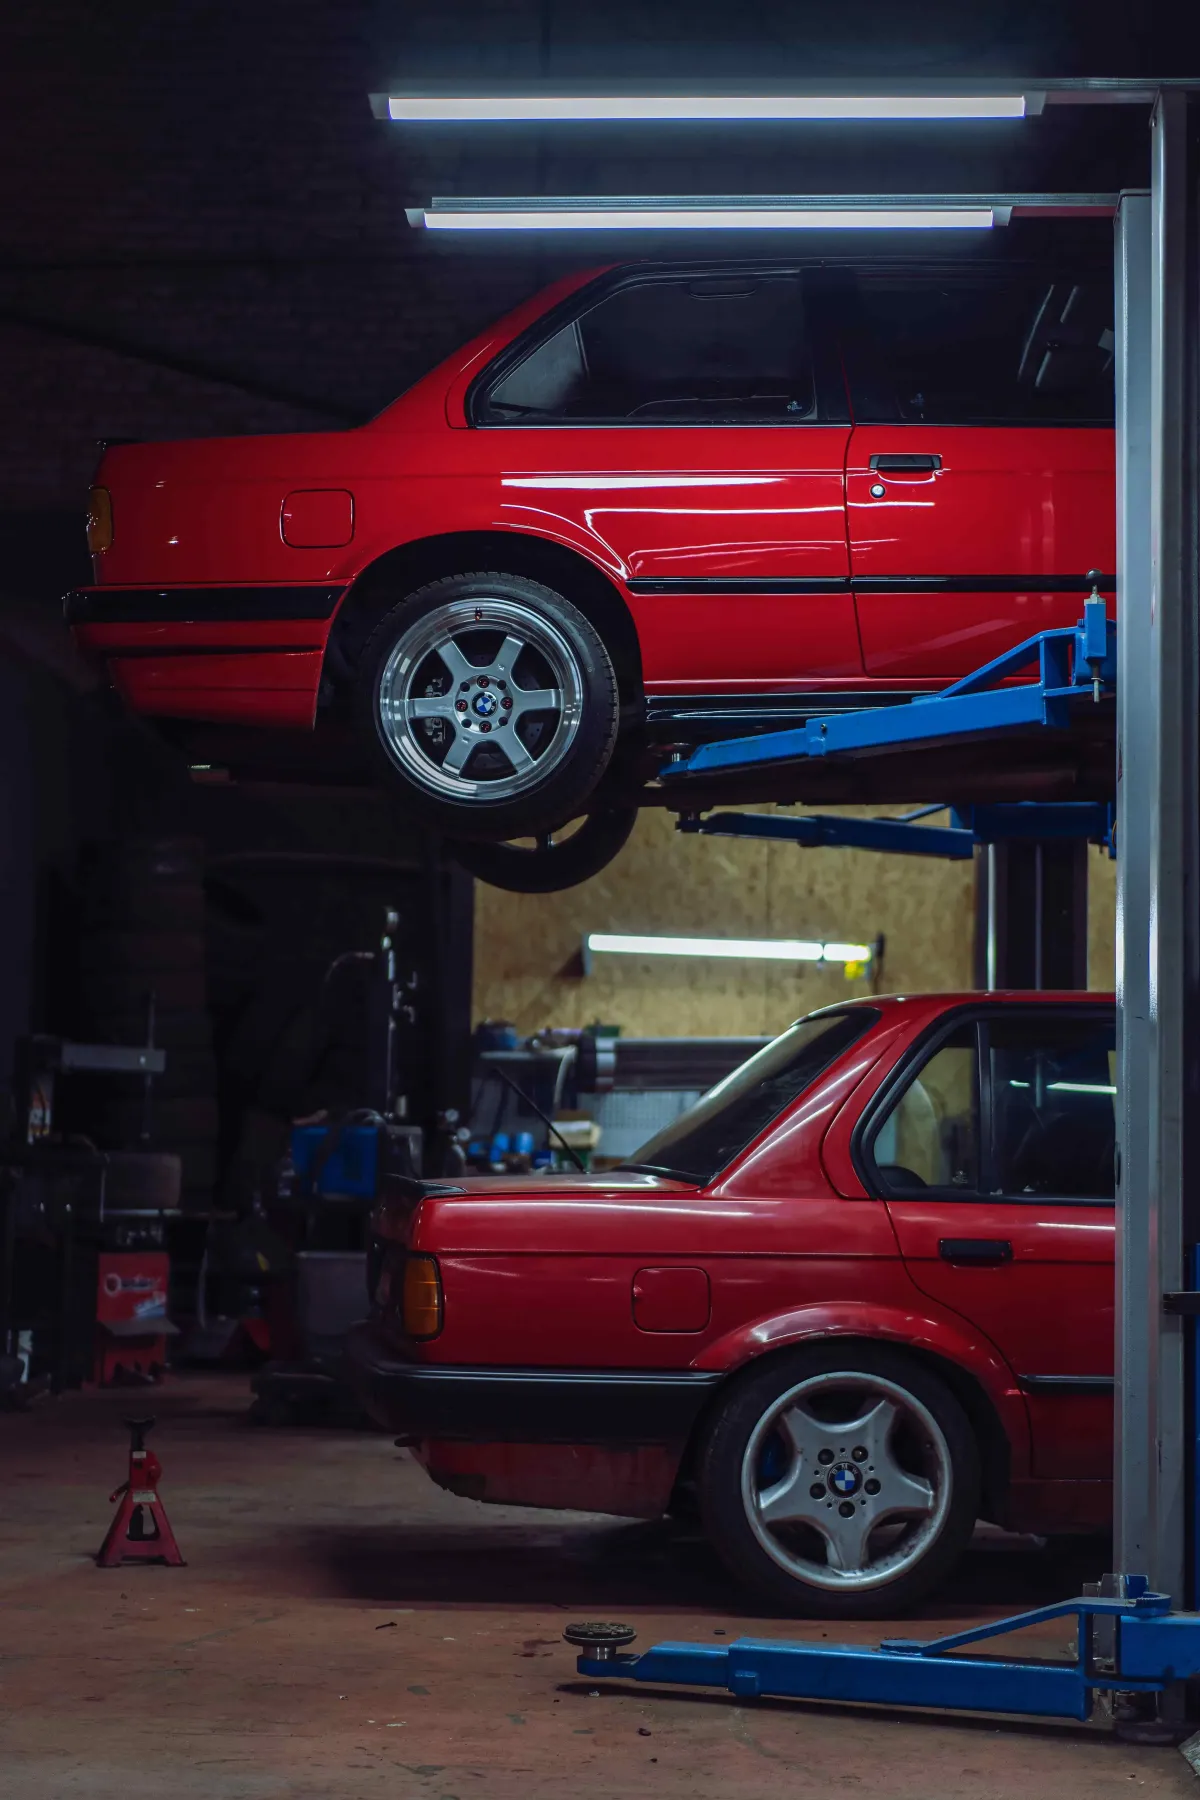 two bmw's are parked inside a auto mechanic shop garage, one is on a lift